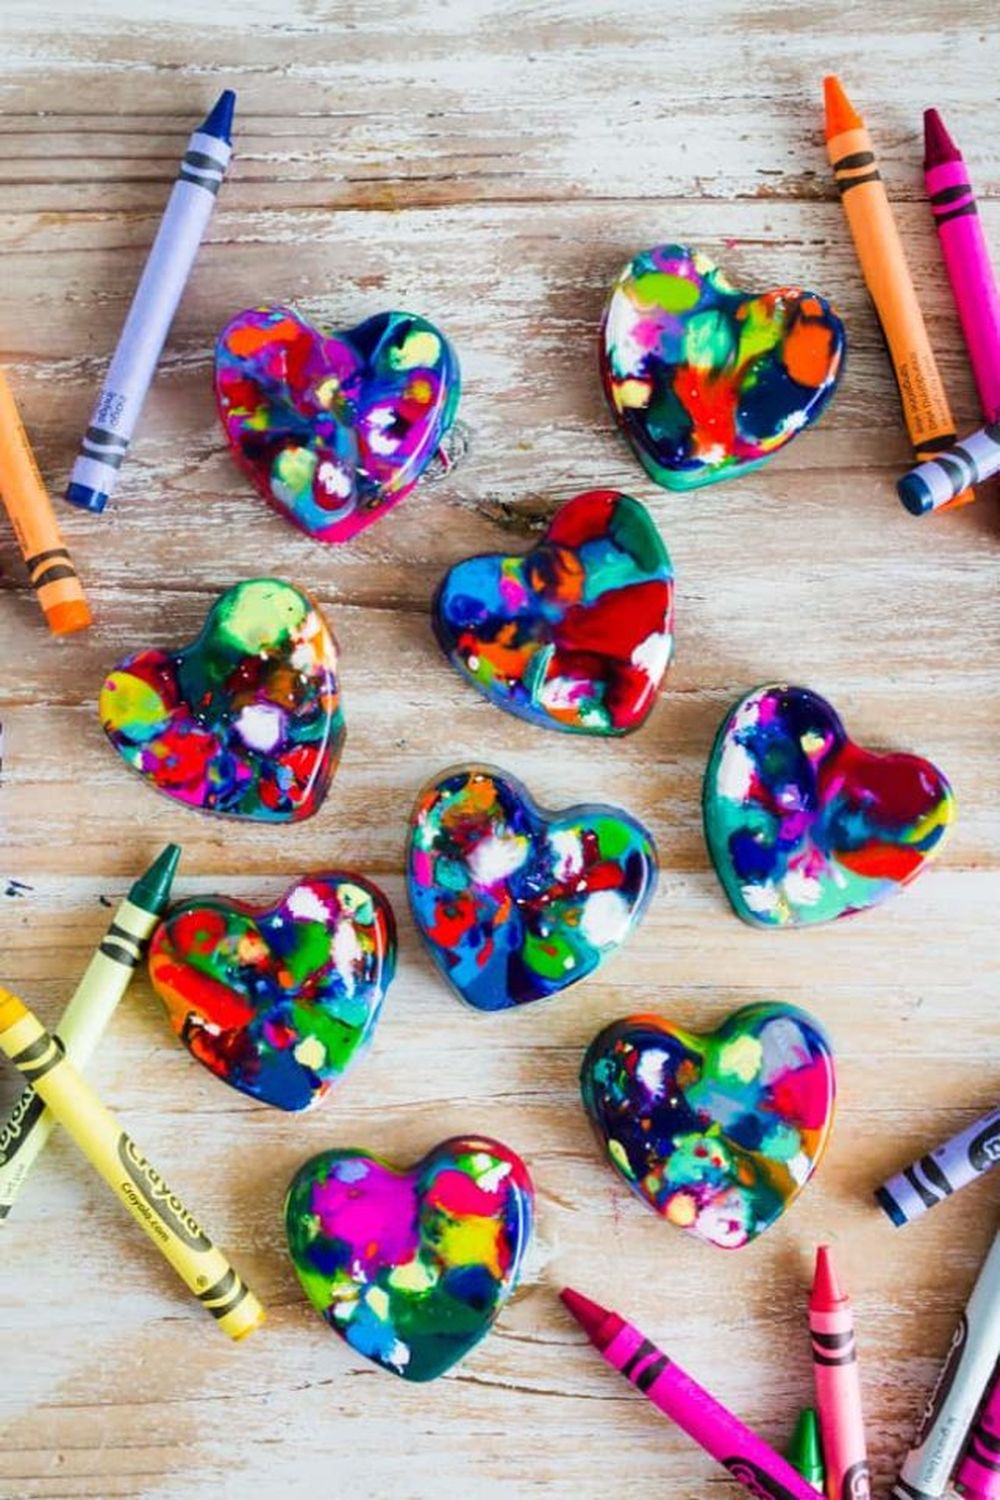 Heart shaped crayons easy valentine's day crafts